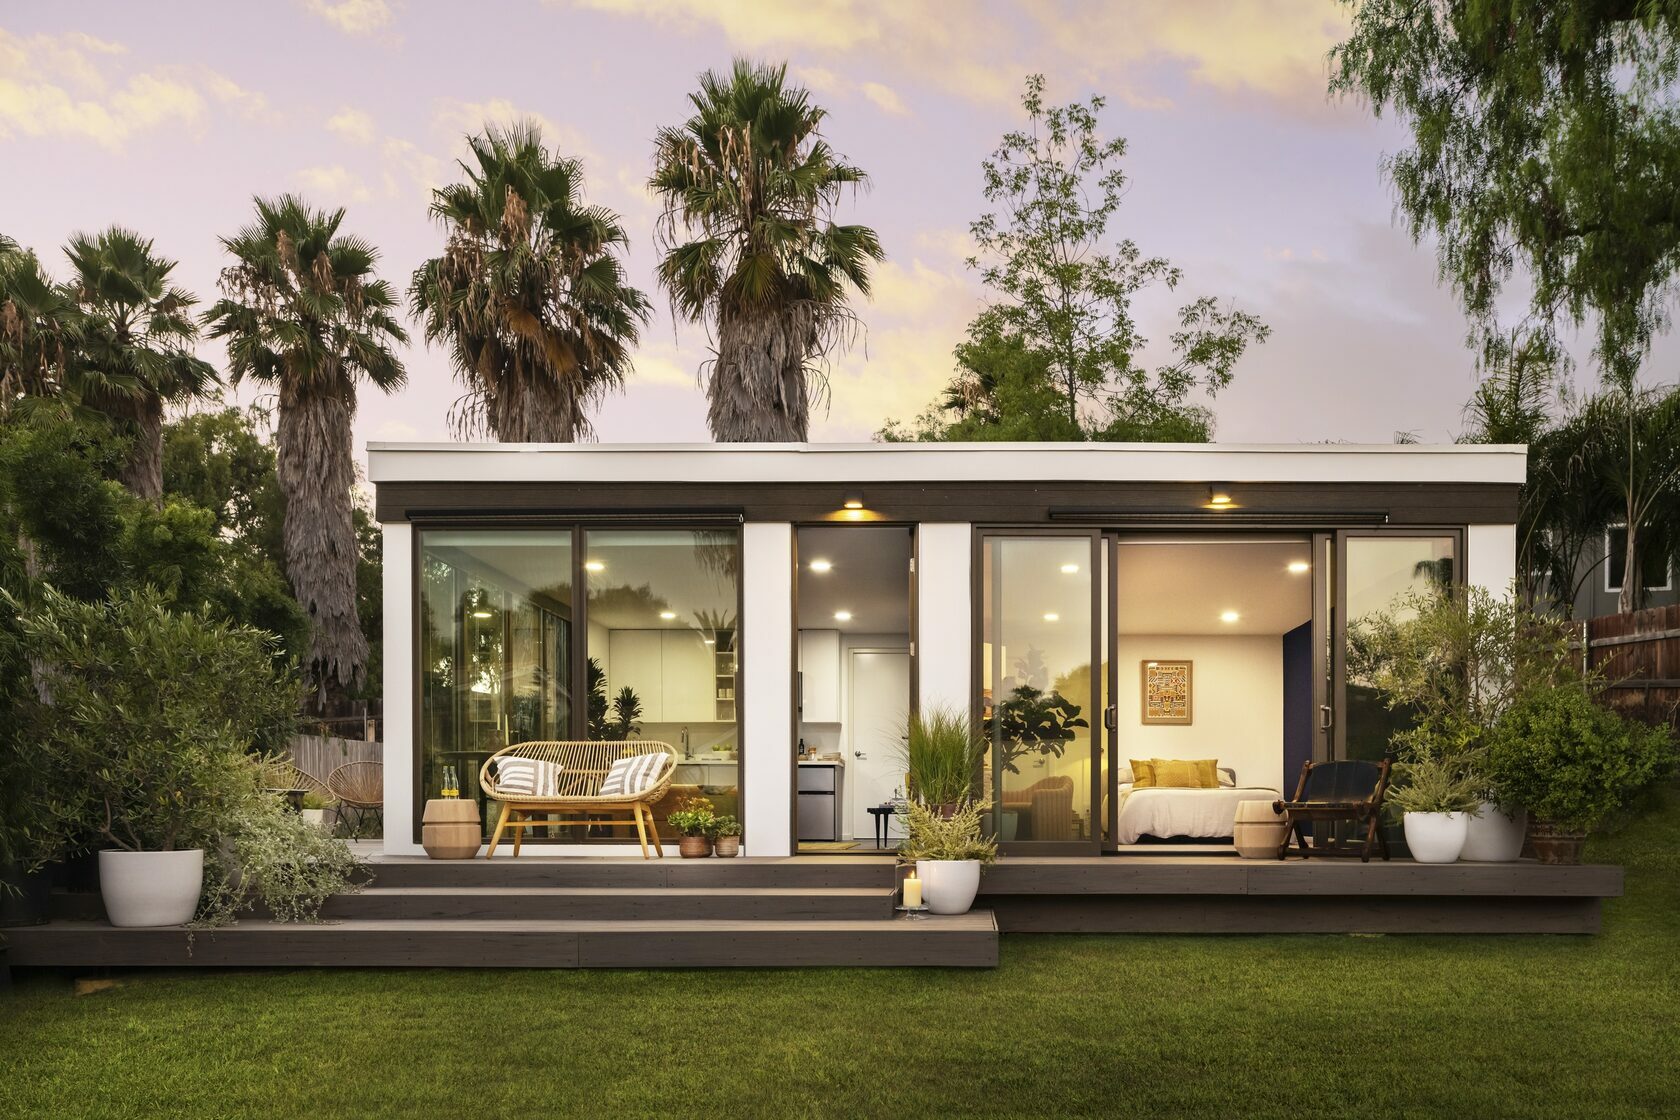 The price for this 3D-printed, 700-square-foot house starts at $269,000.